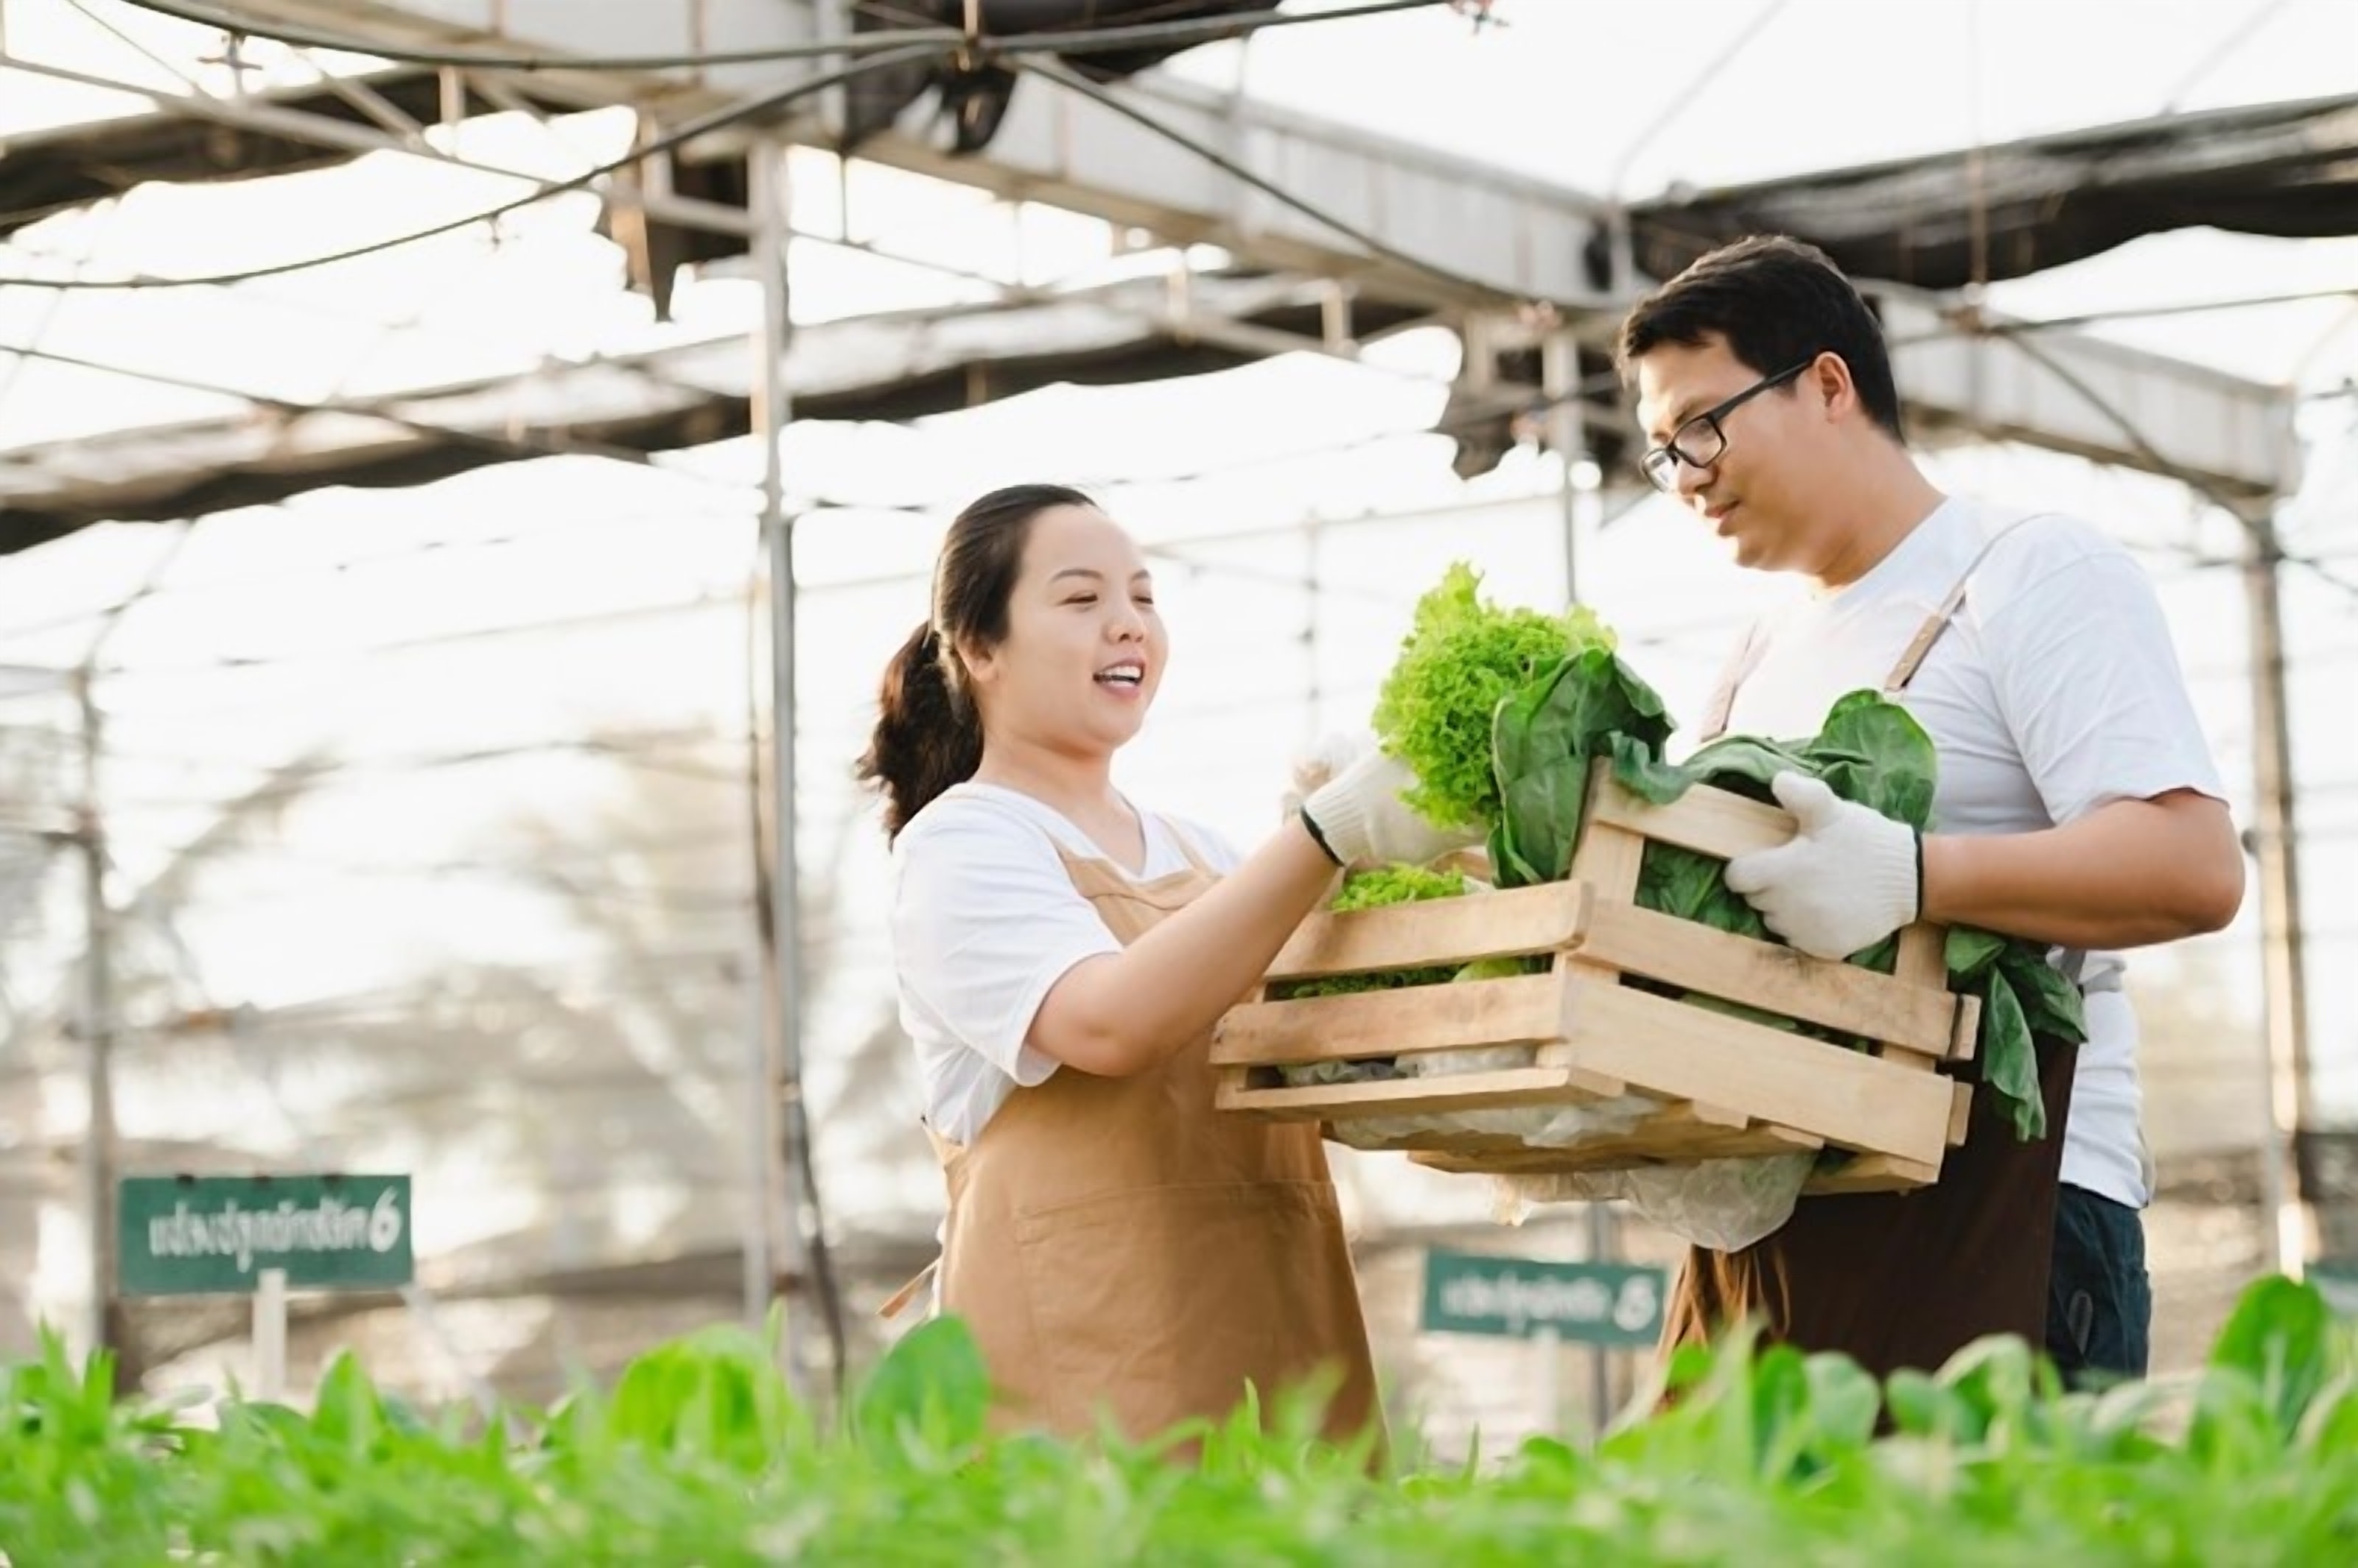 KnowESG_Dusit's green programme for hotels